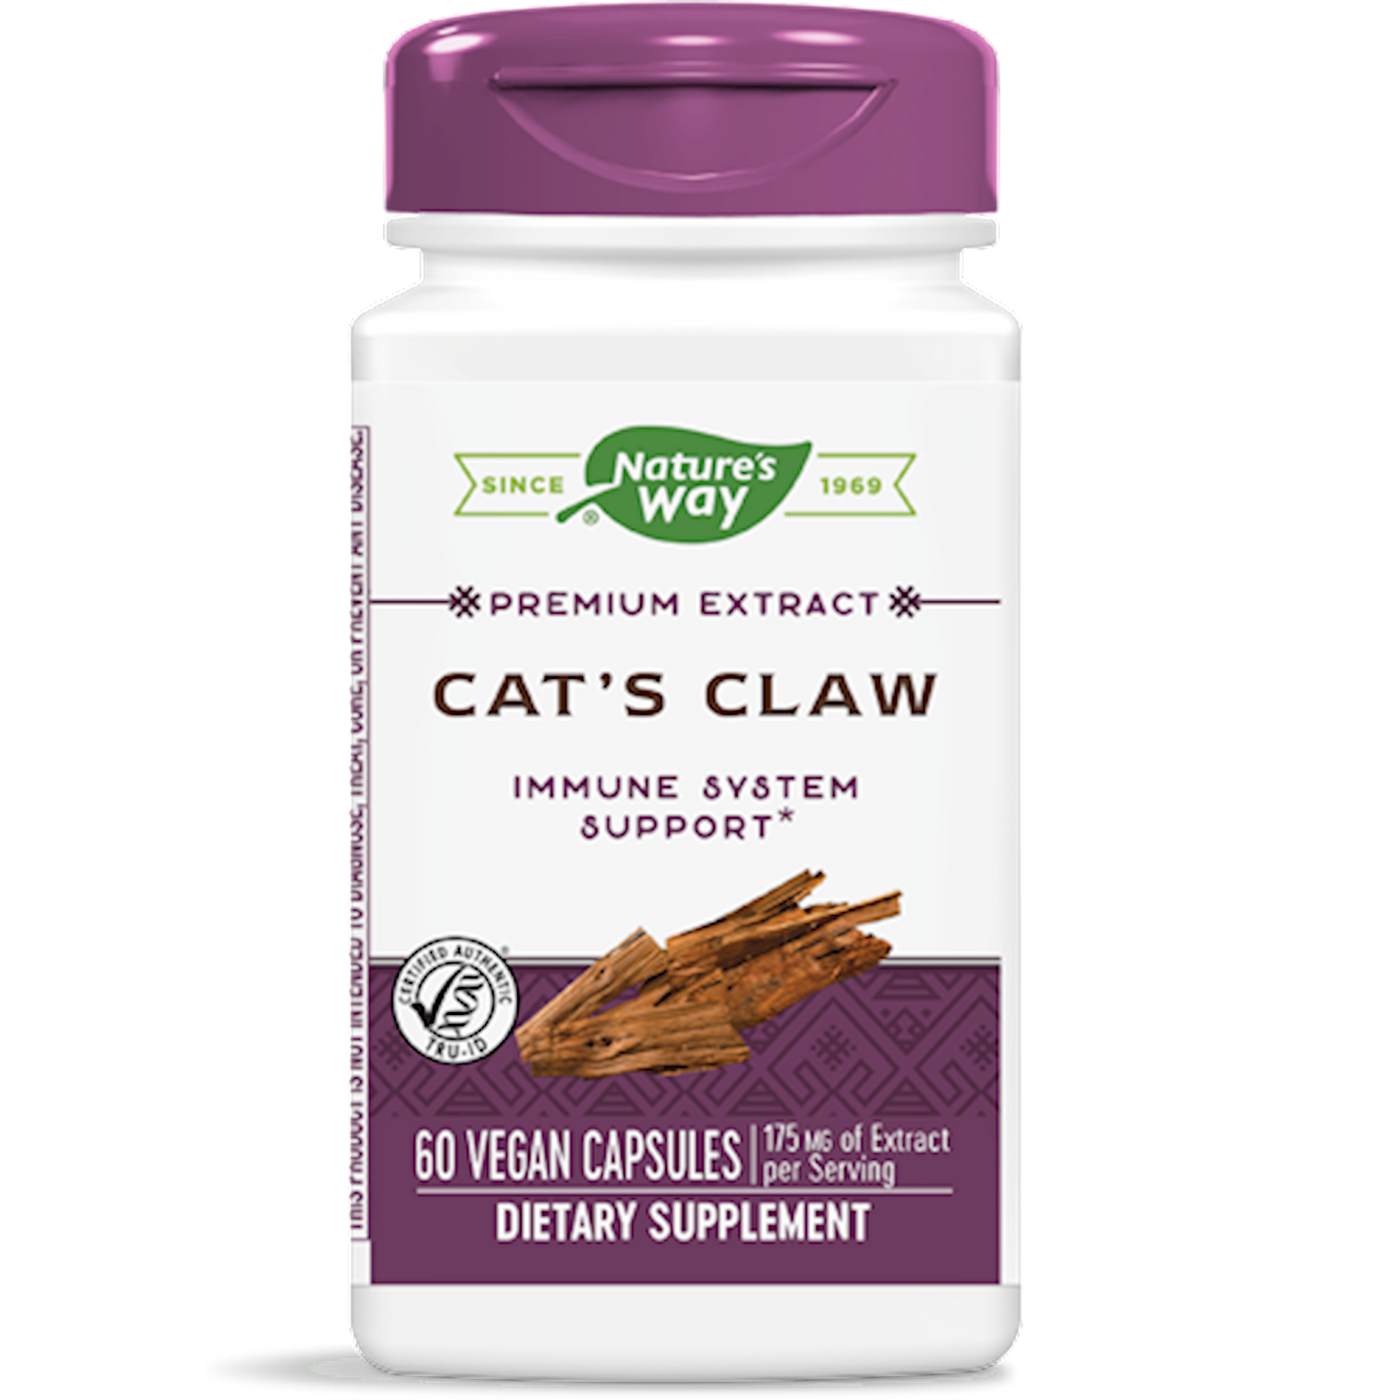 Cat's Claw  Curated Wellness